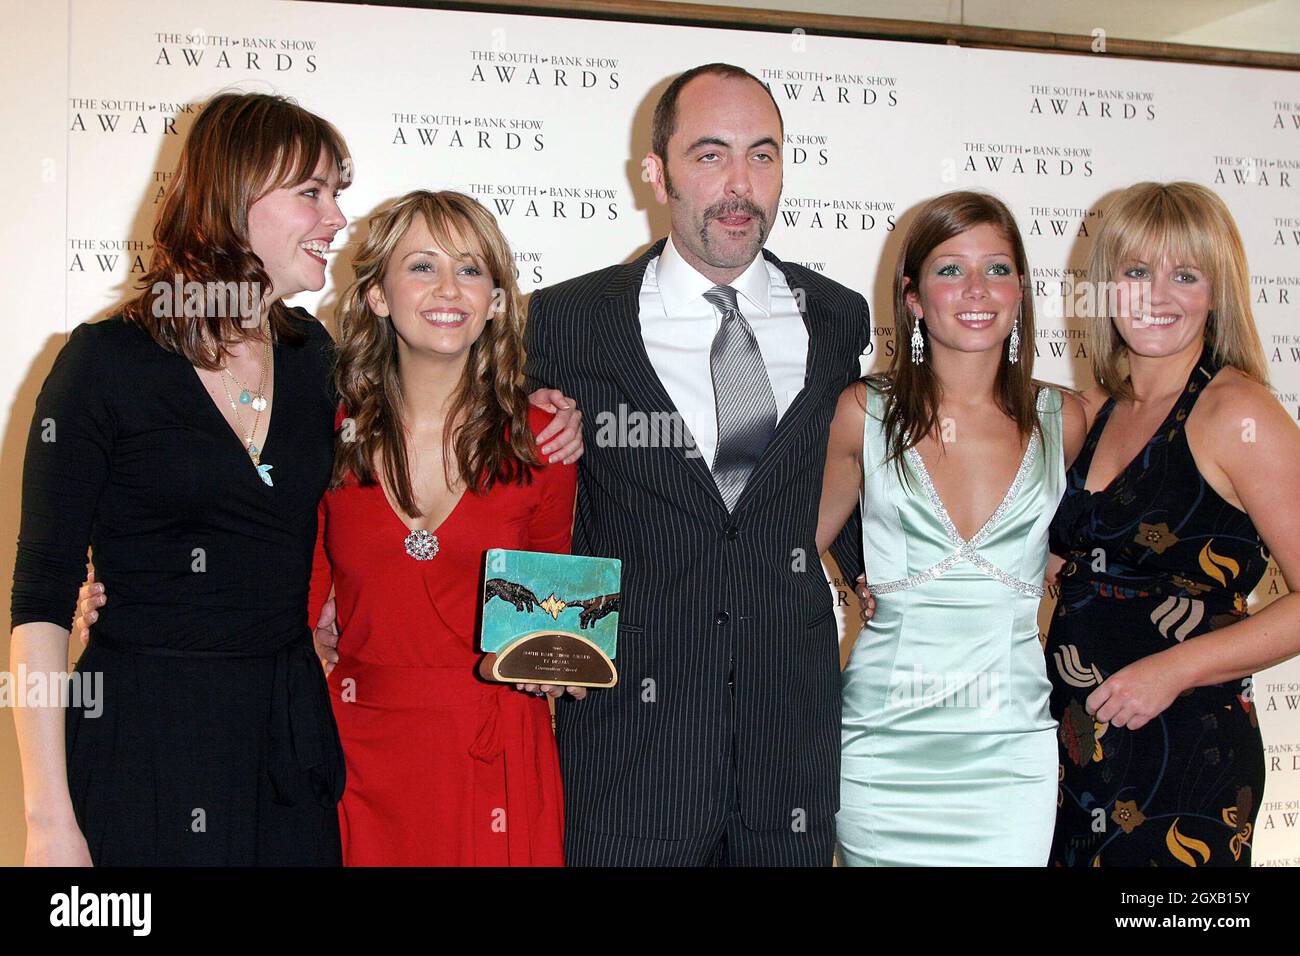 Kate Ford, Samia Ghadie, Nikki Sanderson and Sally Lindsay of Coronation Street with James Nesbitt at the South Bank Show Awards at the Savoy hotel in London. Stock Photo